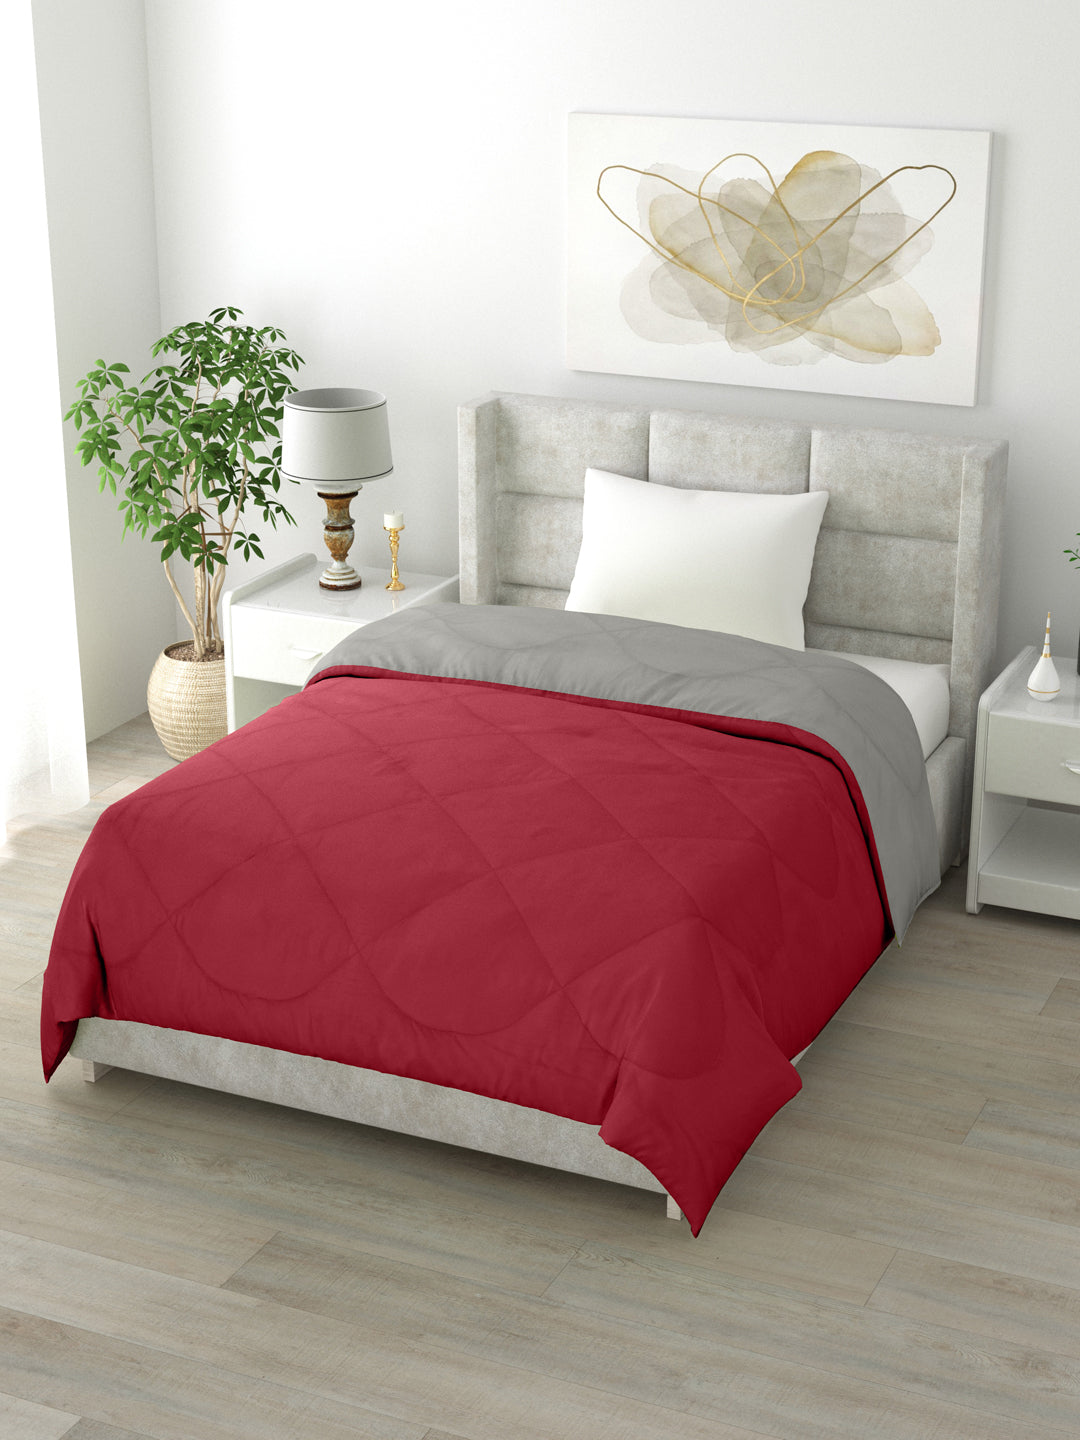 Reversible Single Bed Comforter 200 GSM 60x90 Inches (Grey & Maroon)